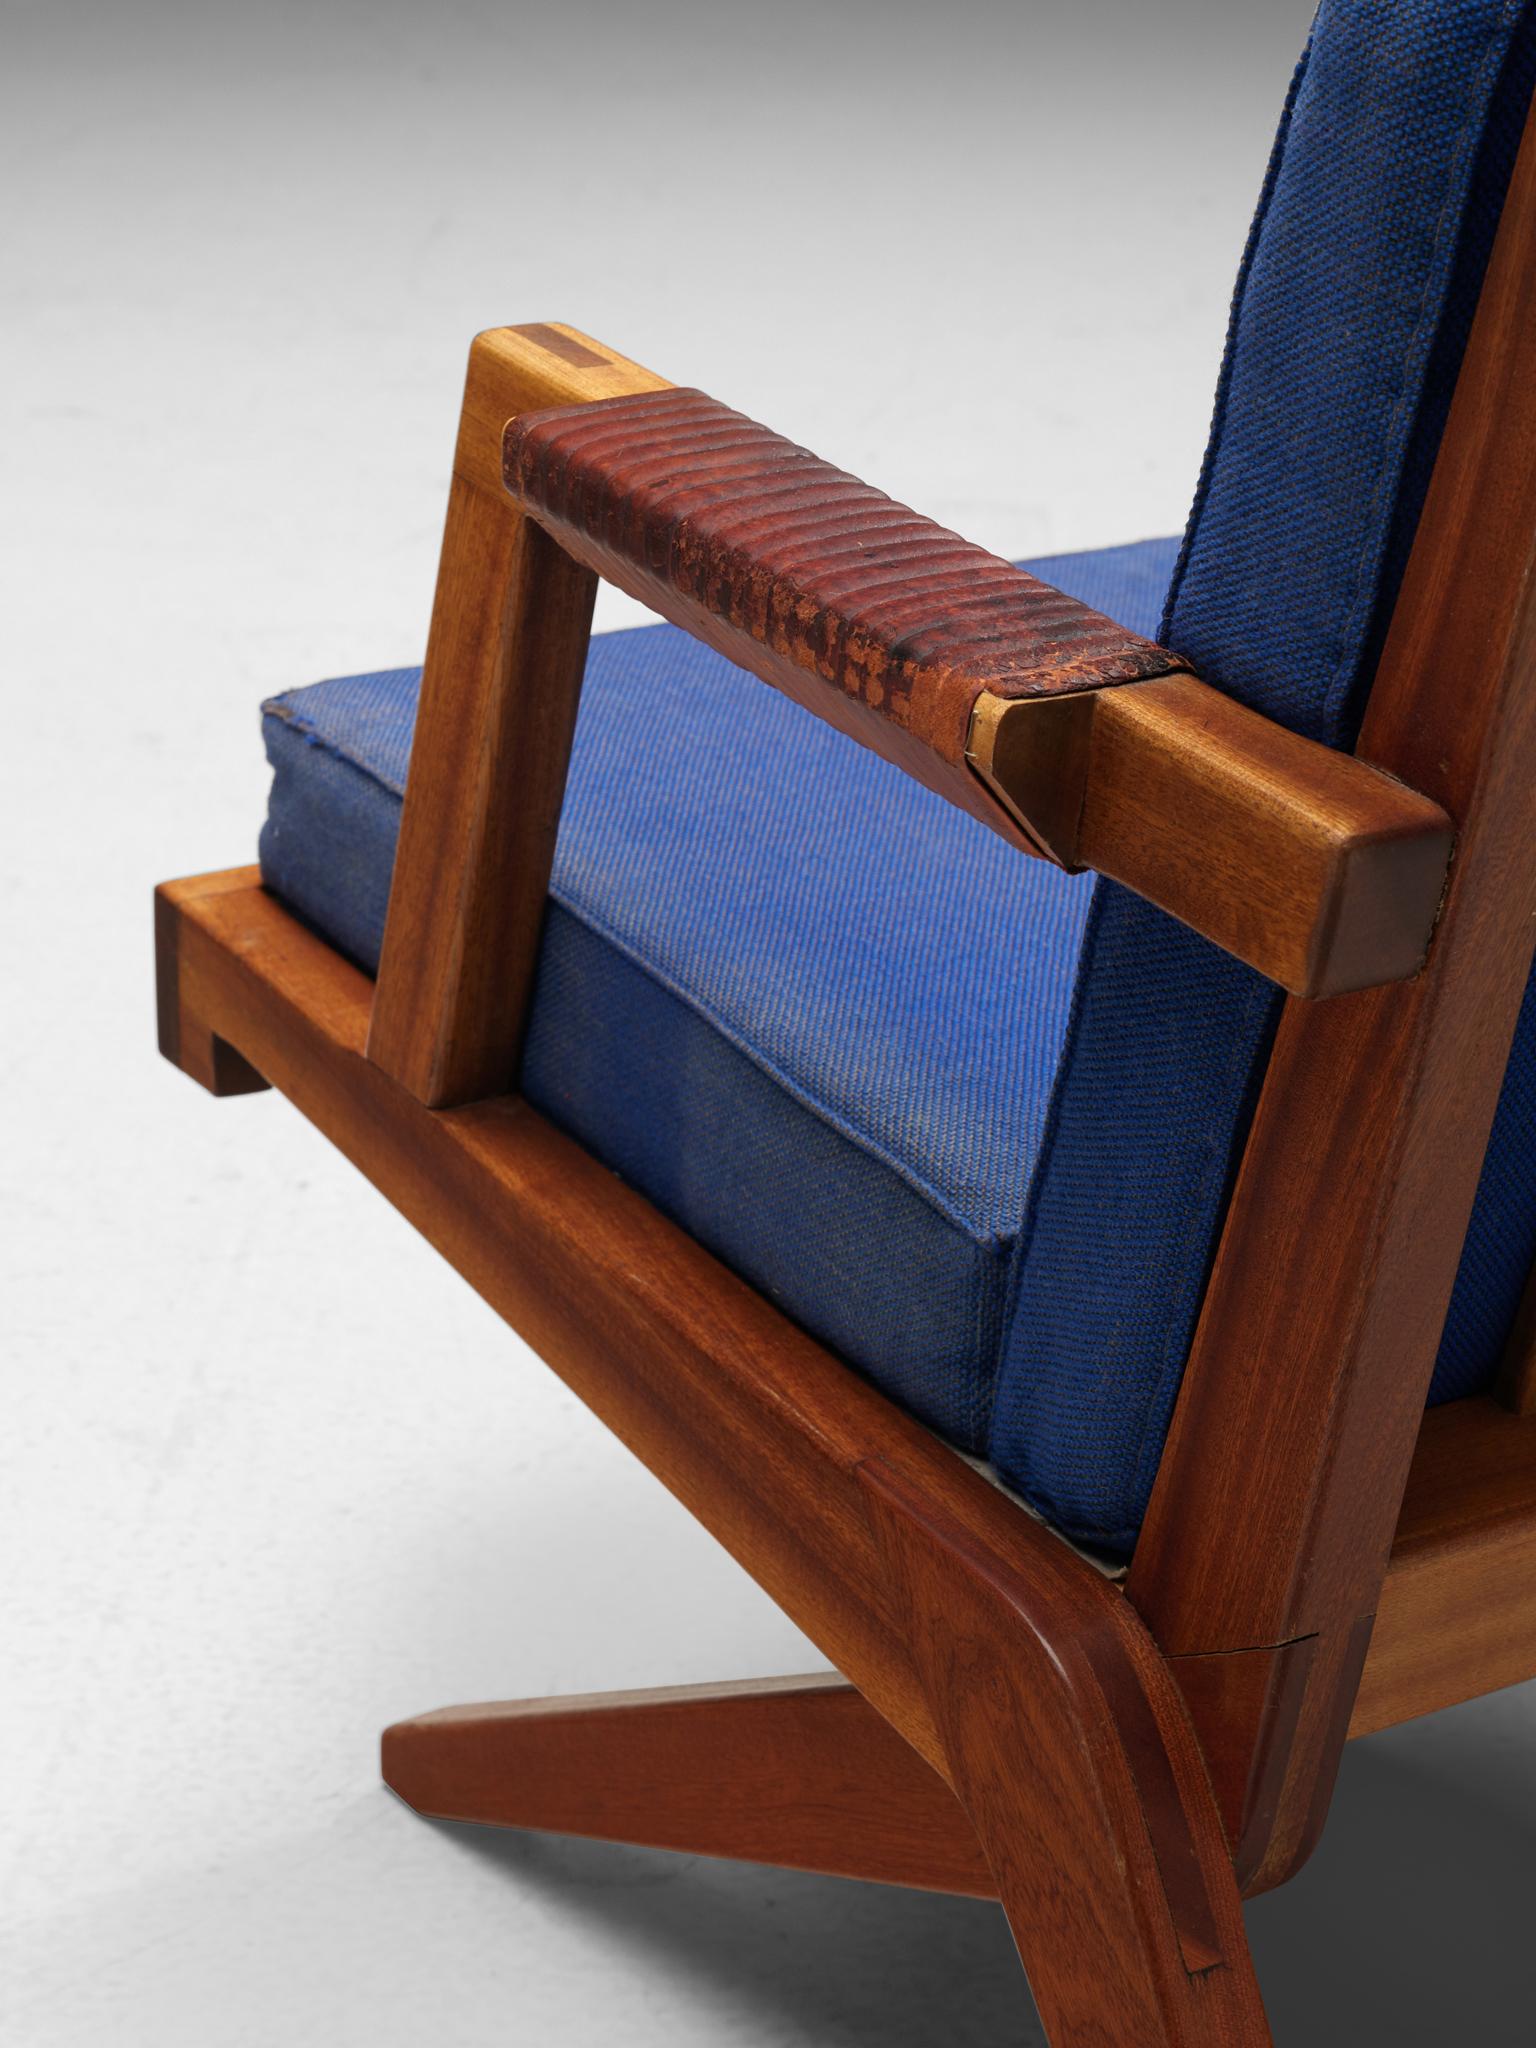 Mid-20th Century Olavi Hanninen 'Boomerang' Chairs with Blue Upholstery